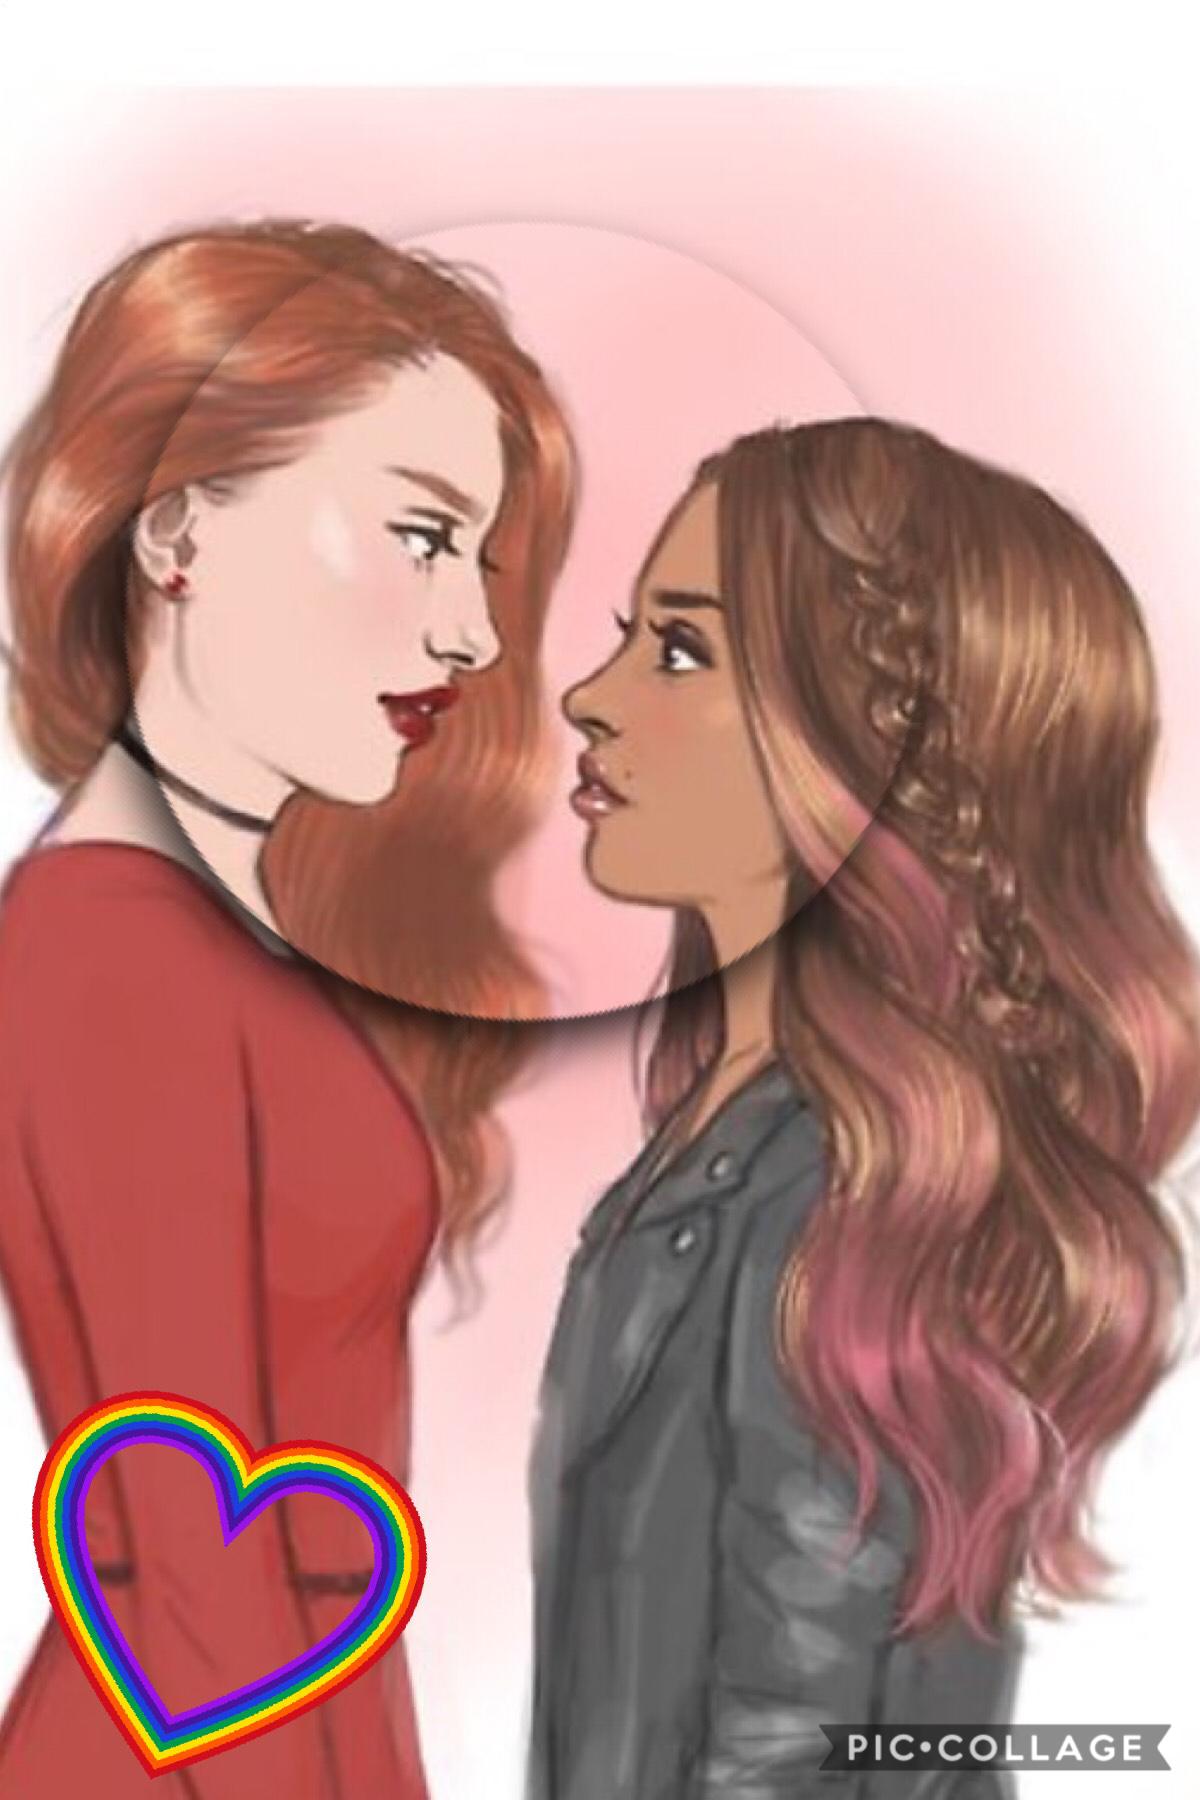 Not my normal post but Choni for life